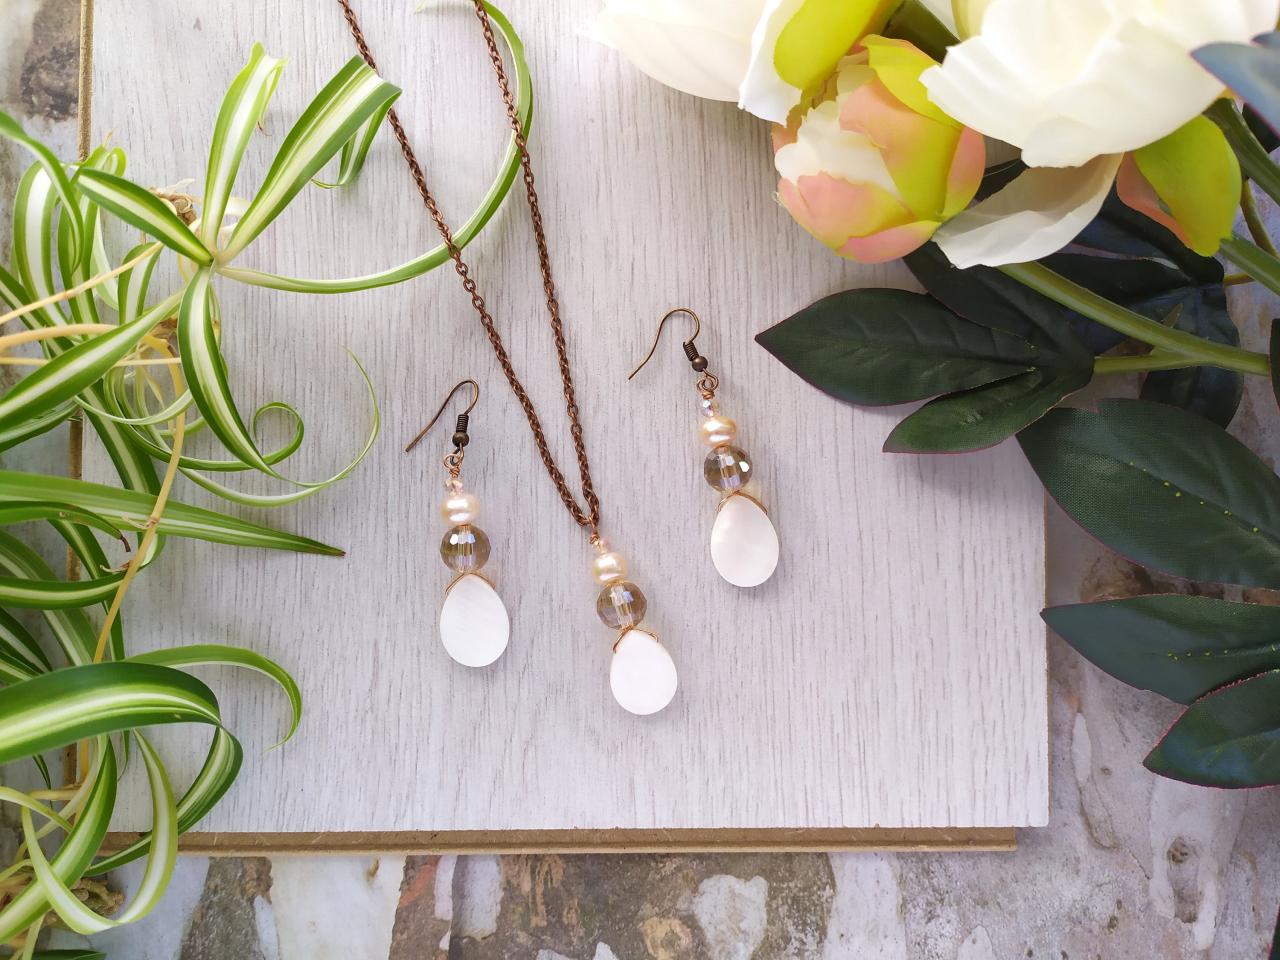 Sweet Water Pearl Earrings And Necklace, Dangle Pearl Earrings, Champagne Pearl Earrings, Pearl Jewelry Set, Elegant Jewelry For Gifting.